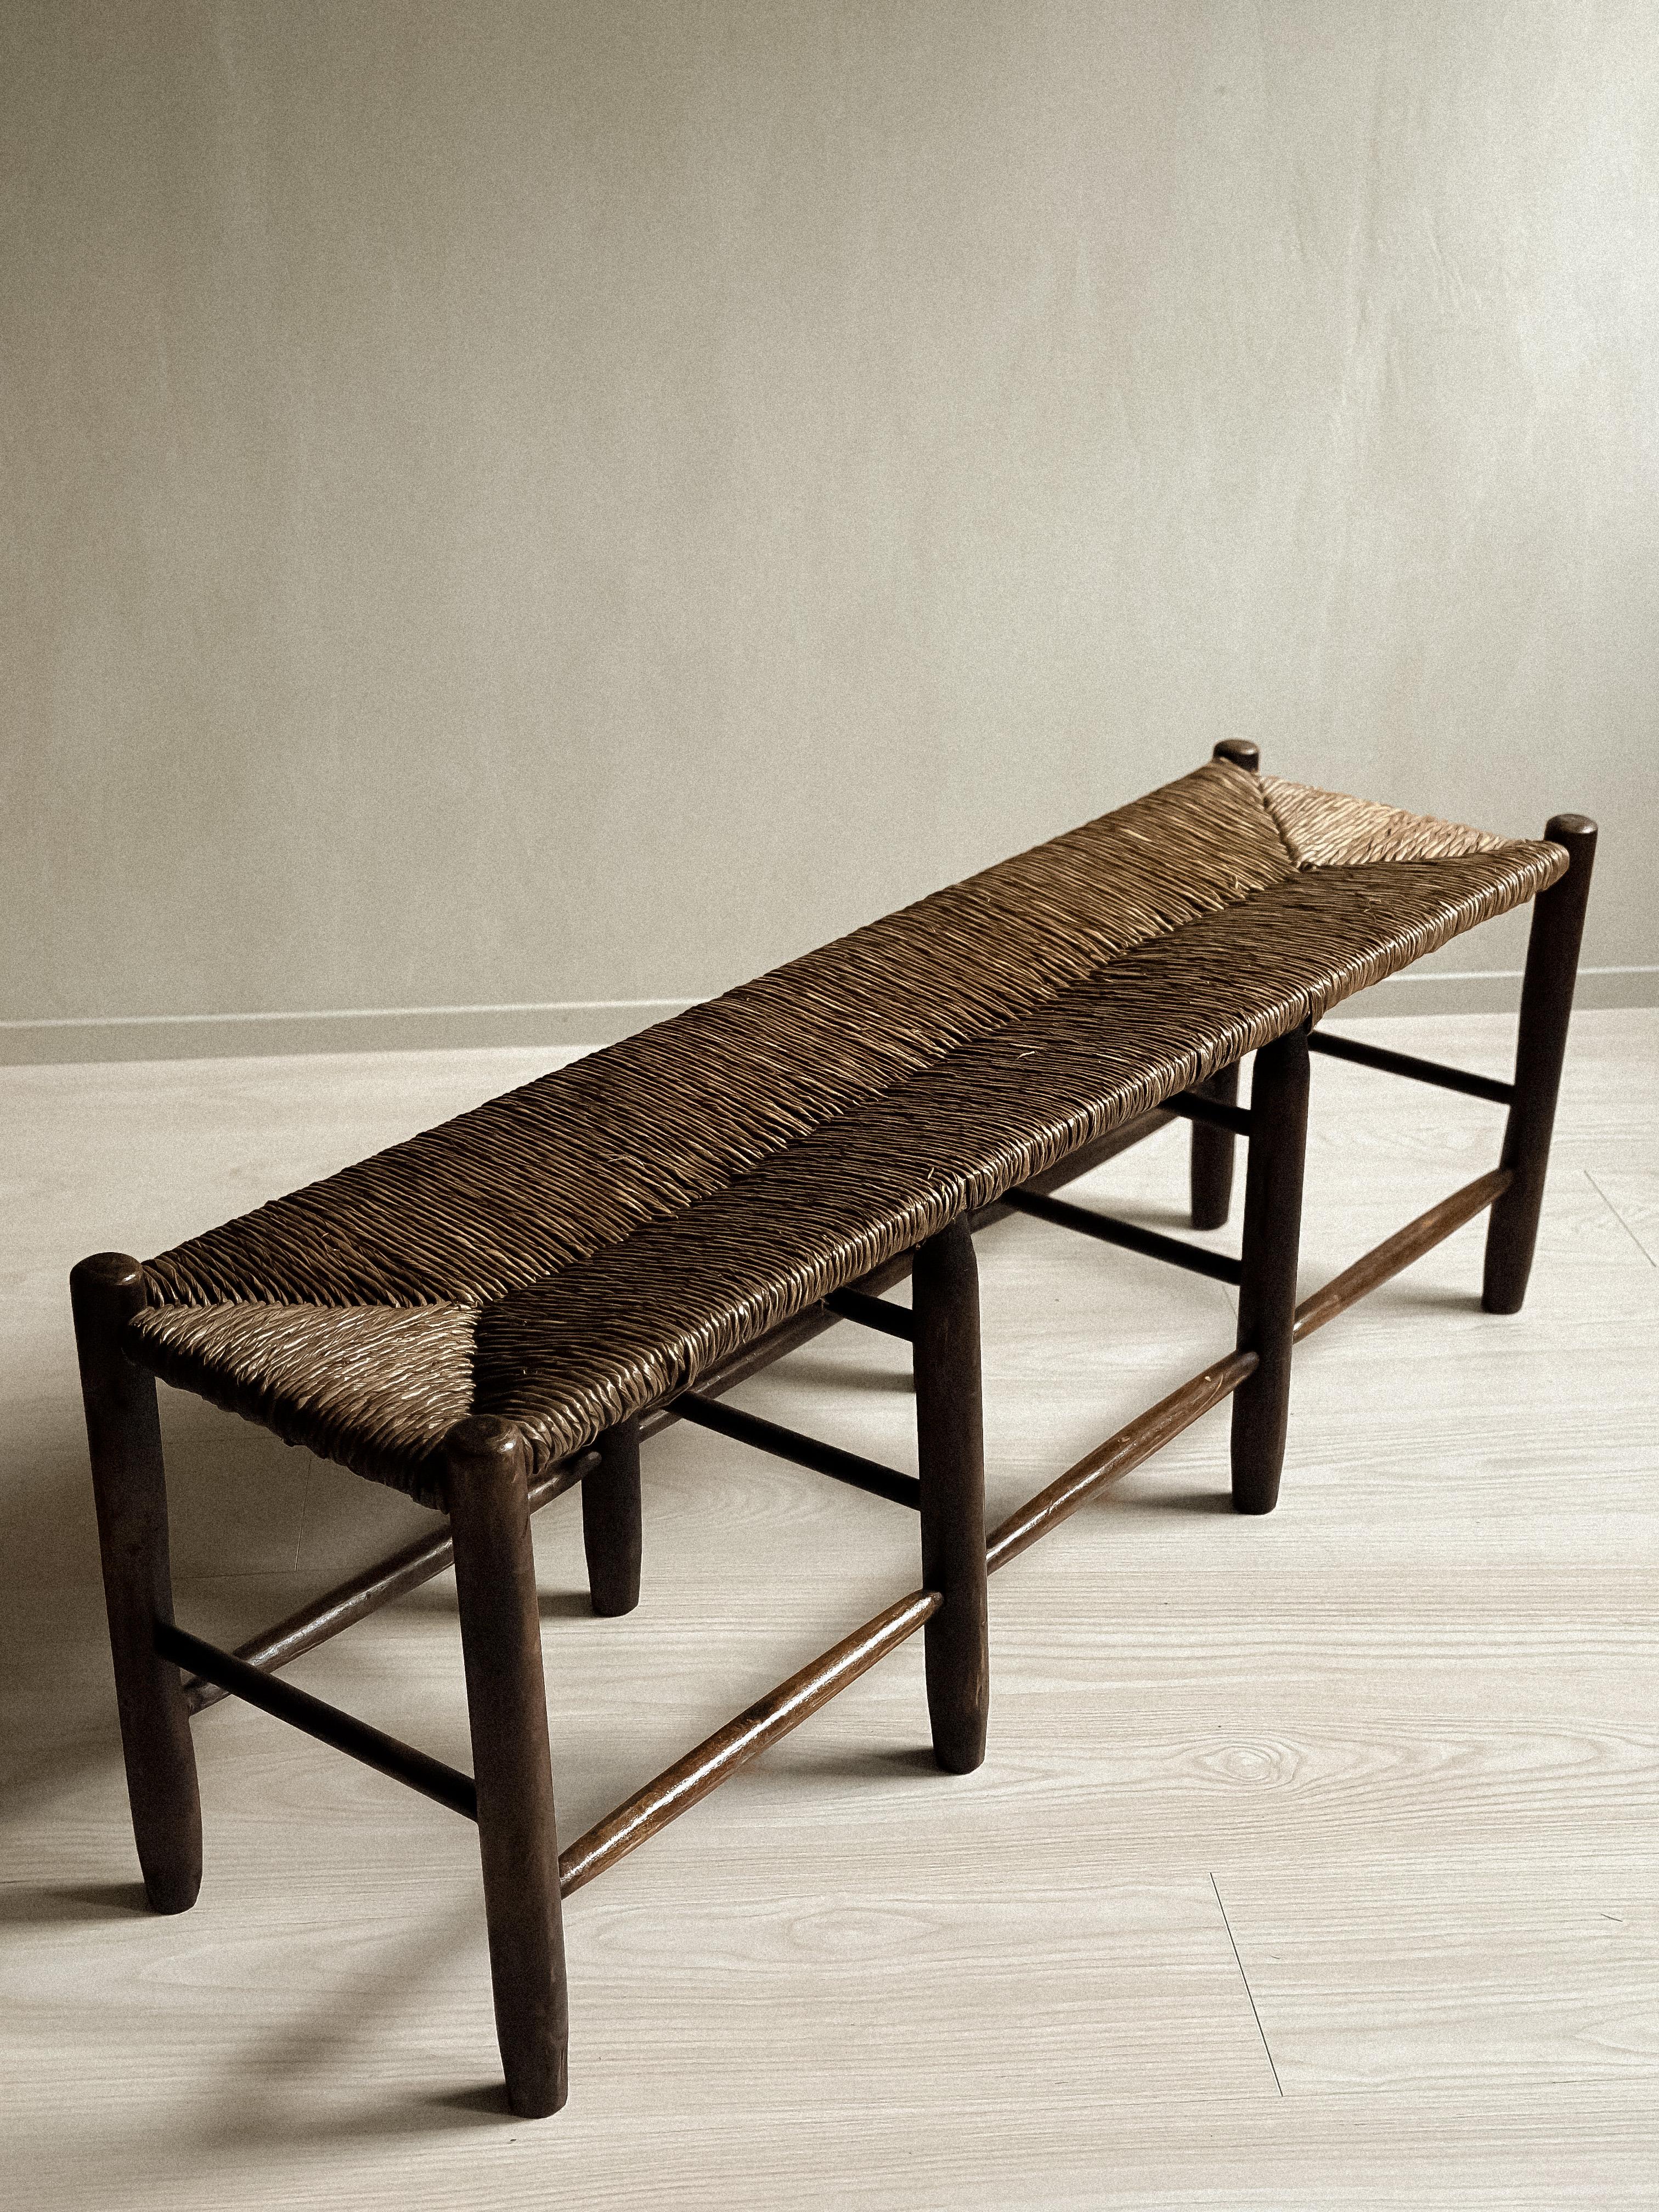 A beautiful Mid-Century Rush bench in dark stained Oak in the manner of Charlotte Perriand. Designed by French anonomus designer, c. 1950s. In good vintage condition. Wear consitent with age and use. 